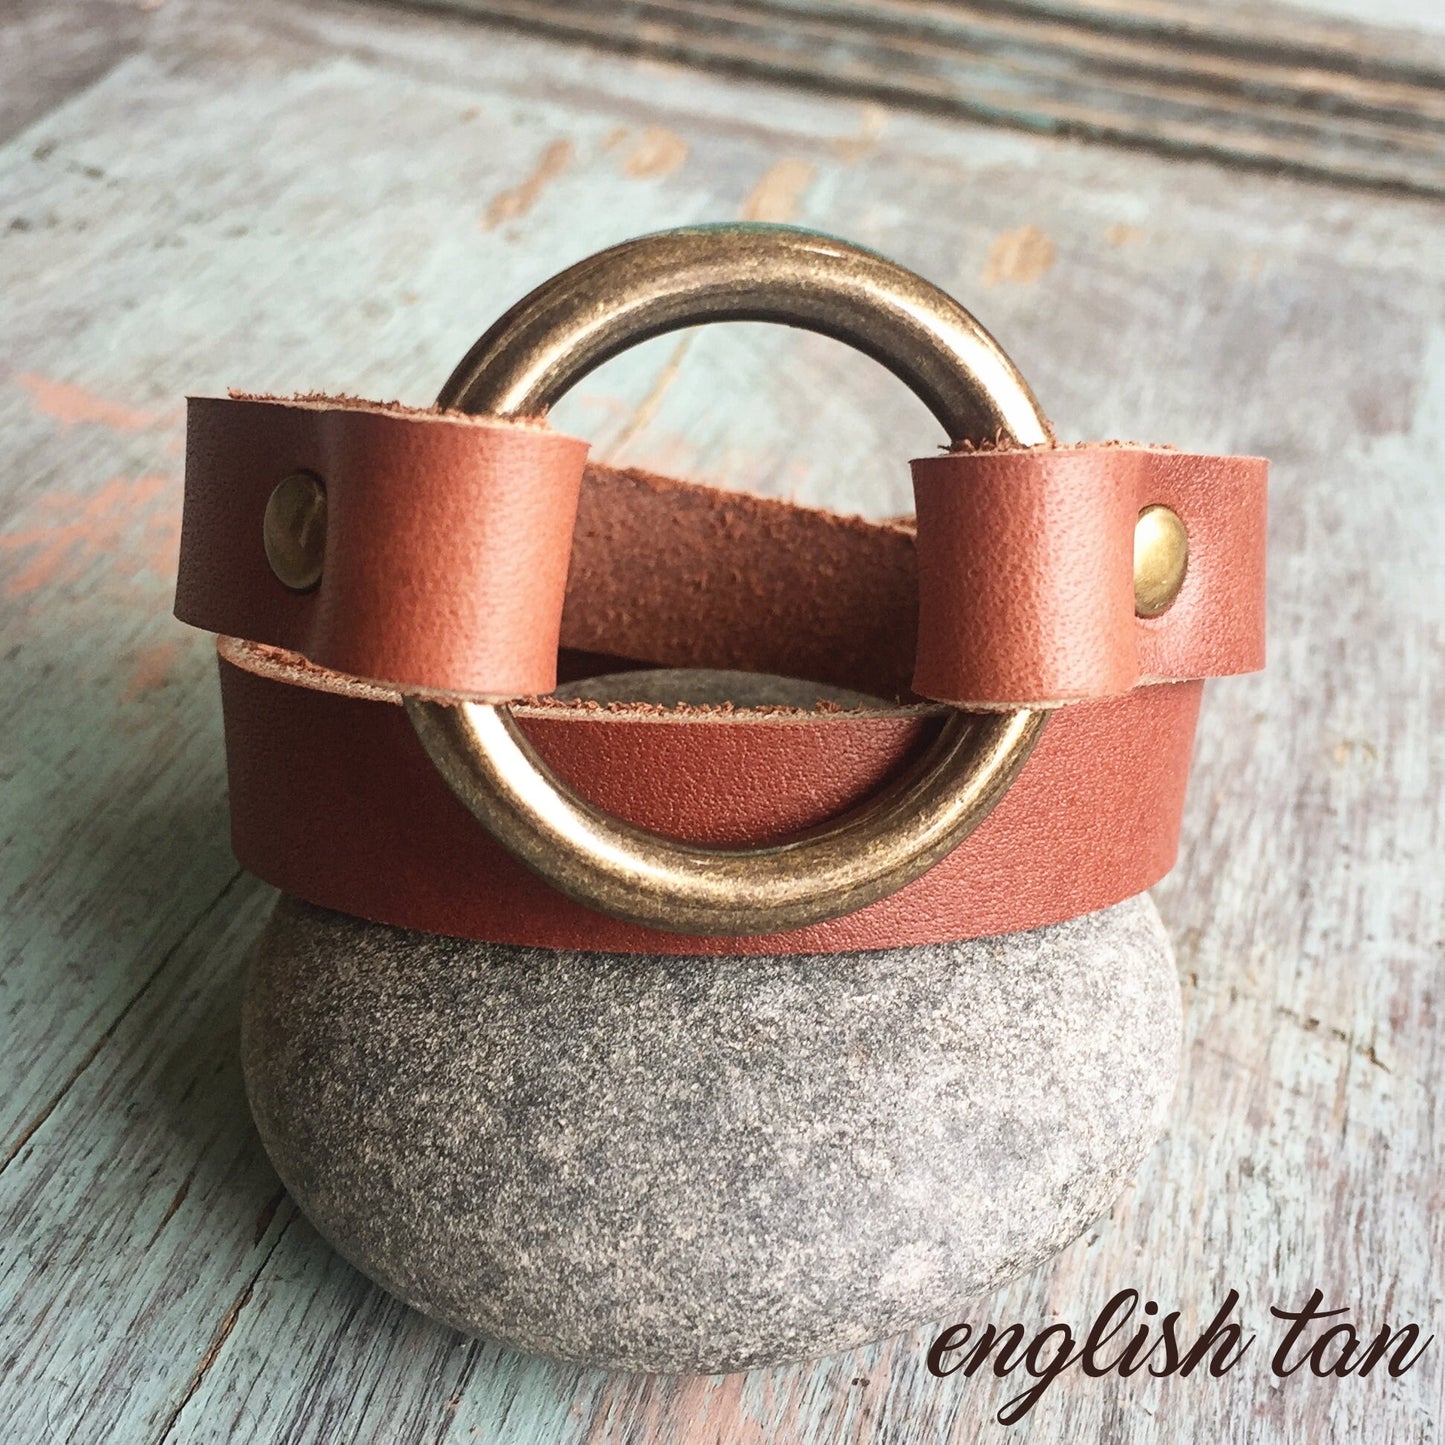 Everyday leather wrap bracelet, Womens leather cuff, Leather wrap bracelet for women, Bracelet for women, Leather jewelry, Anniversary gift